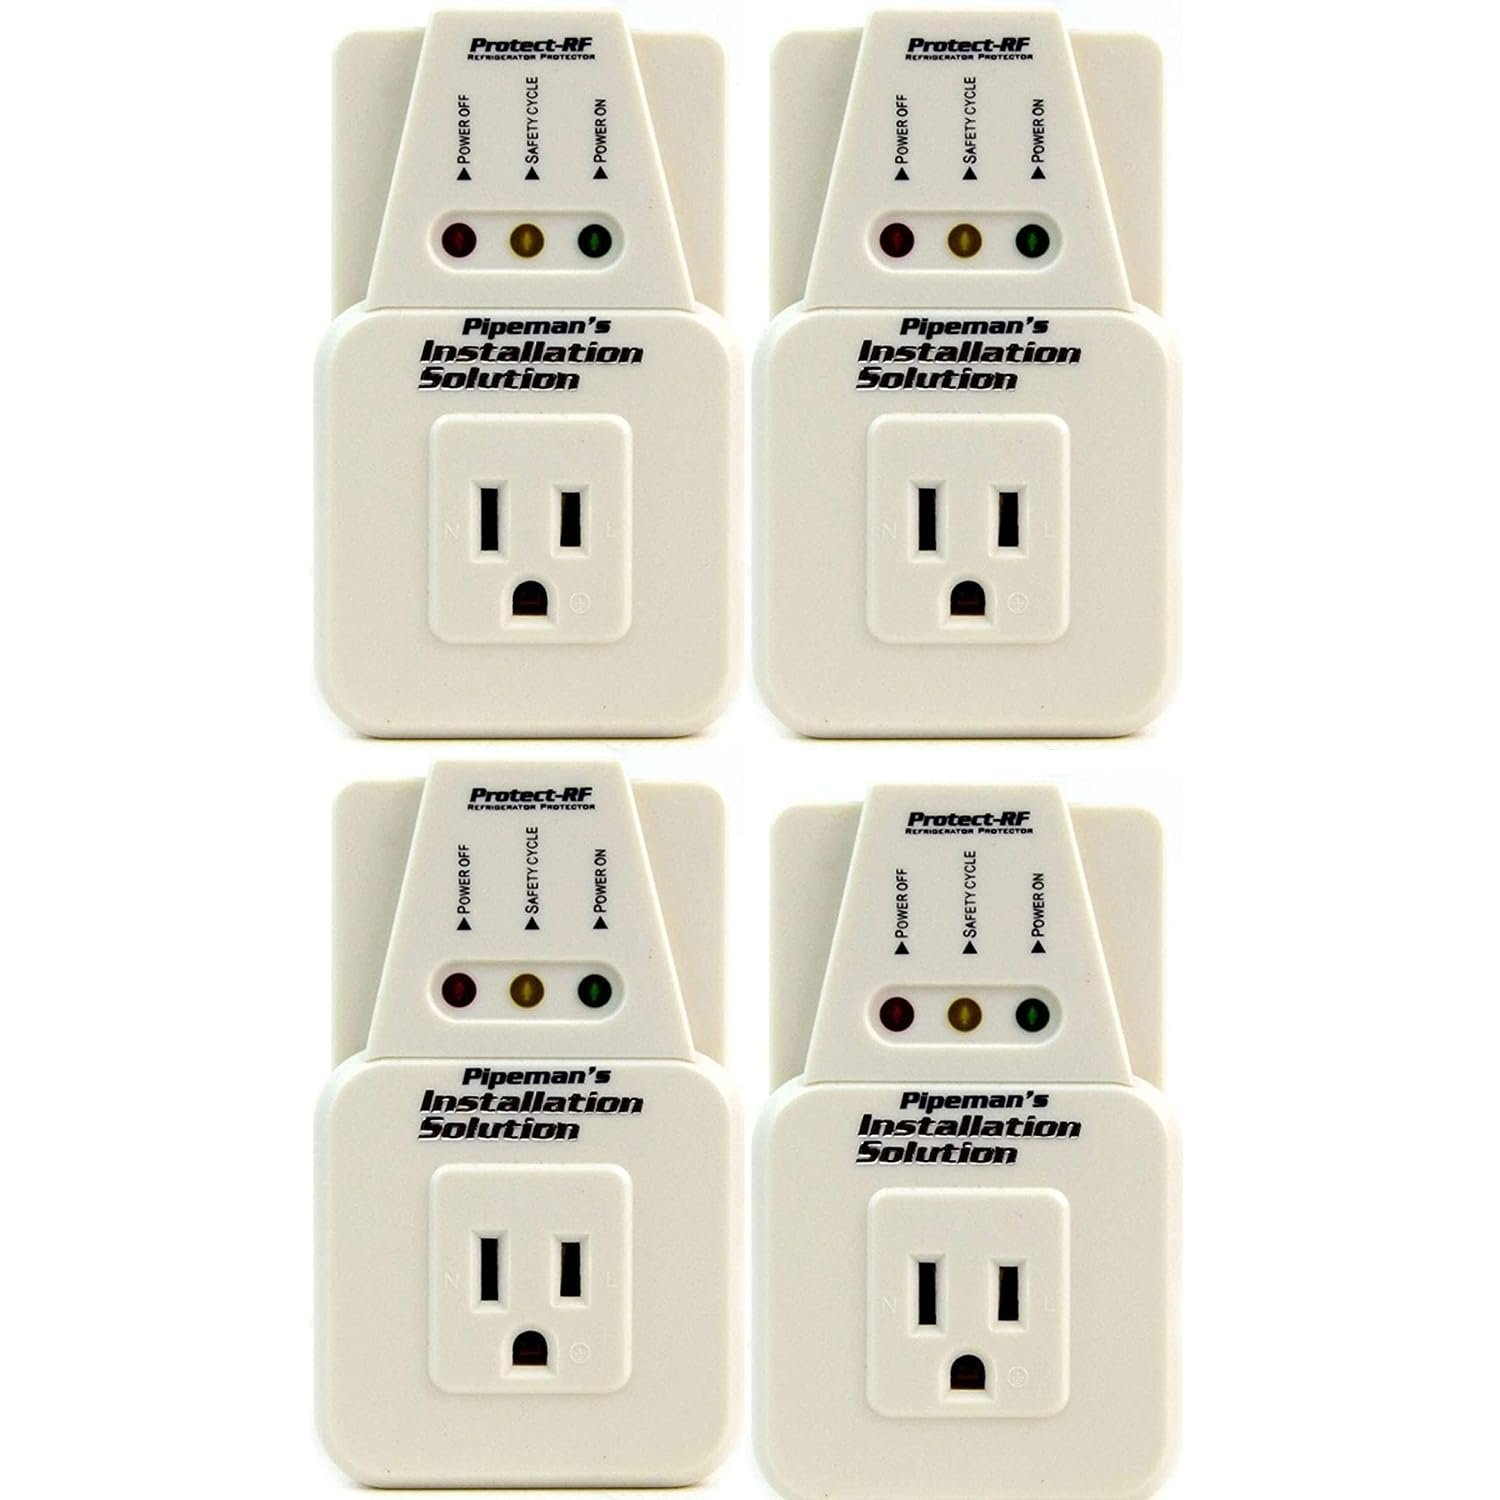 4 pcs Voltage Protector Brownout Surge Refrigerator 1800 Watts Appliance  NEW